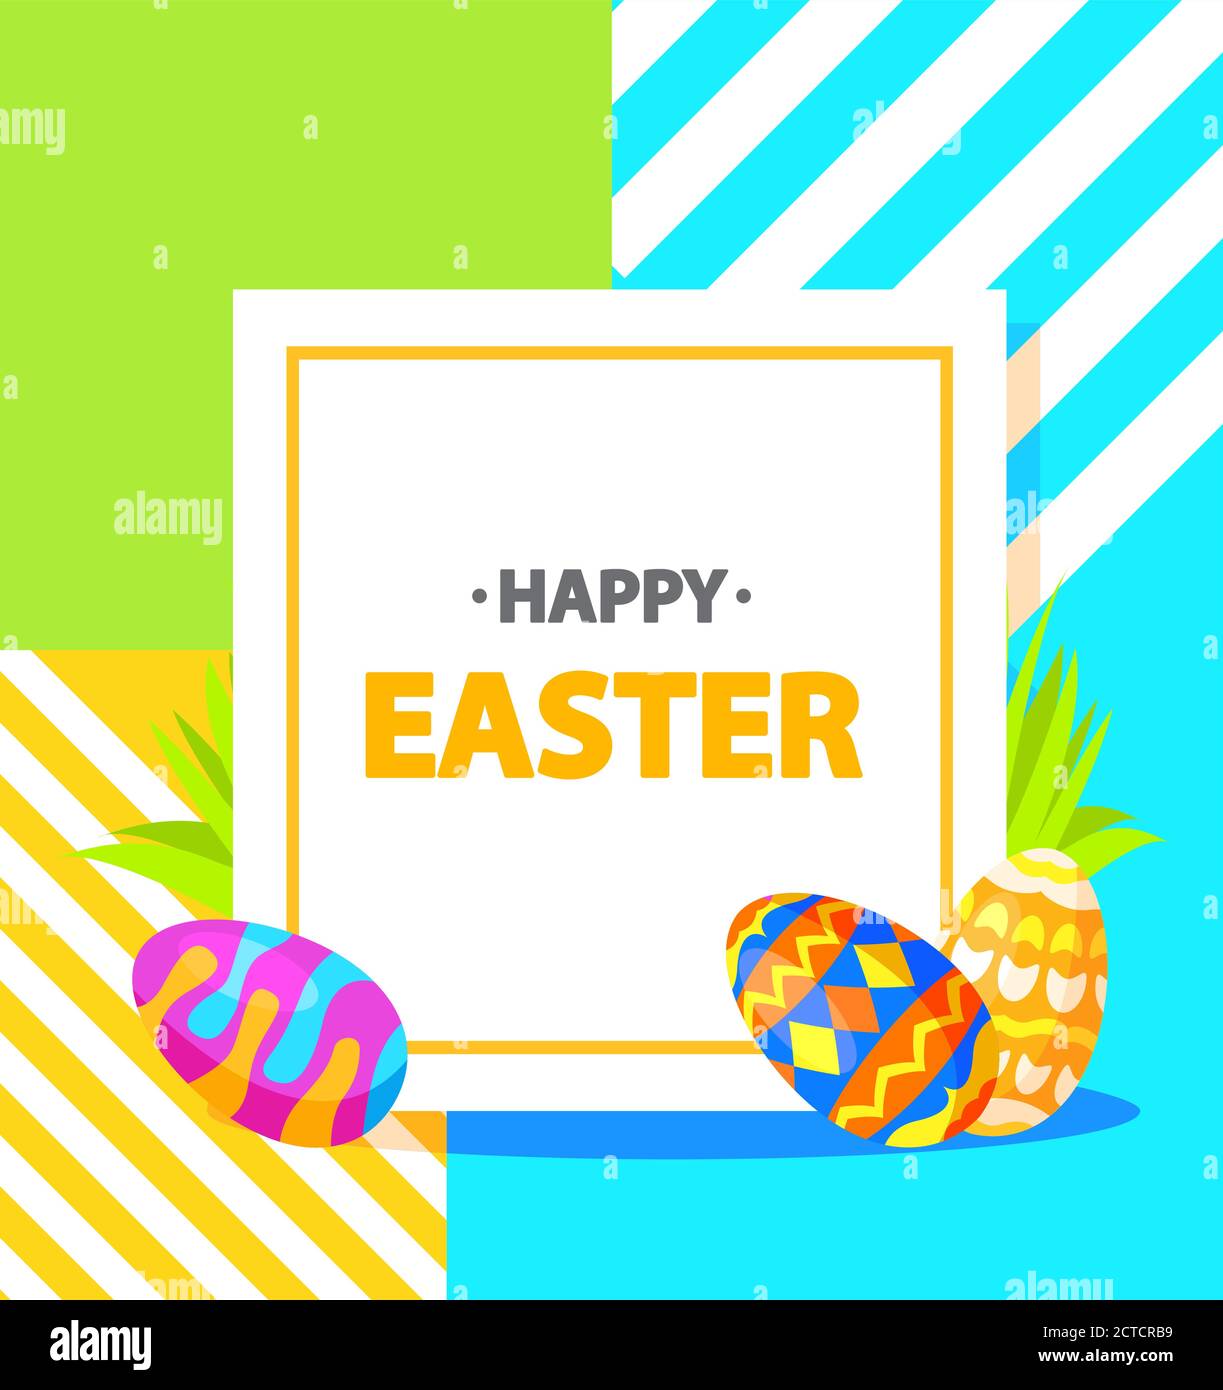 Festive banner. Happy Easter eggs on a grass the painted lie ornament. Flat illustration vector.Website banner concept.Spring holiday. Stock Vector